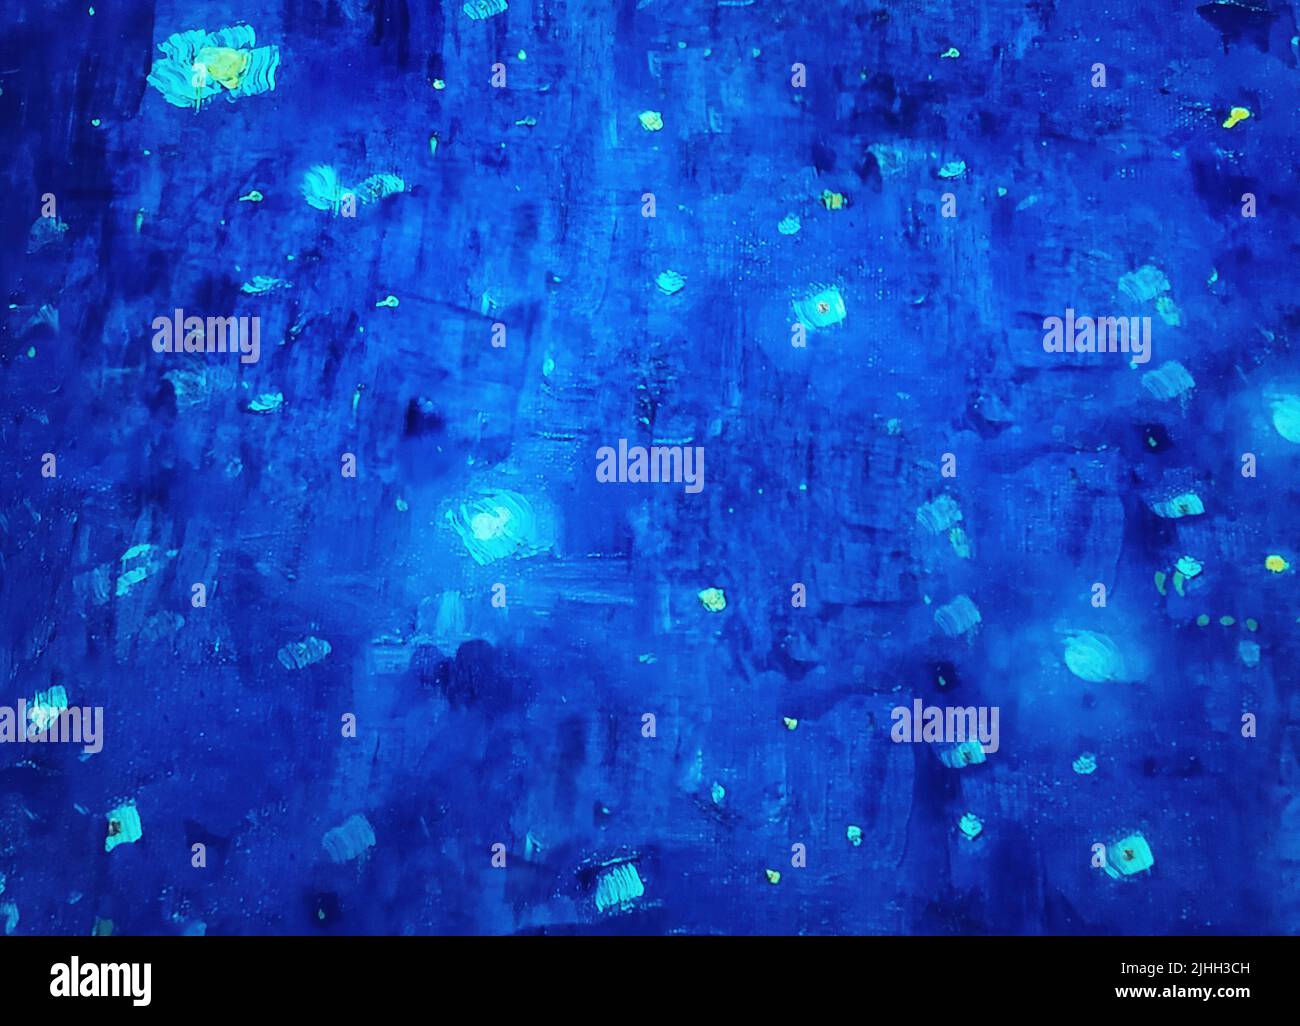 Contemporary starry blue constellation abstract oil paint pattern Stock Photo